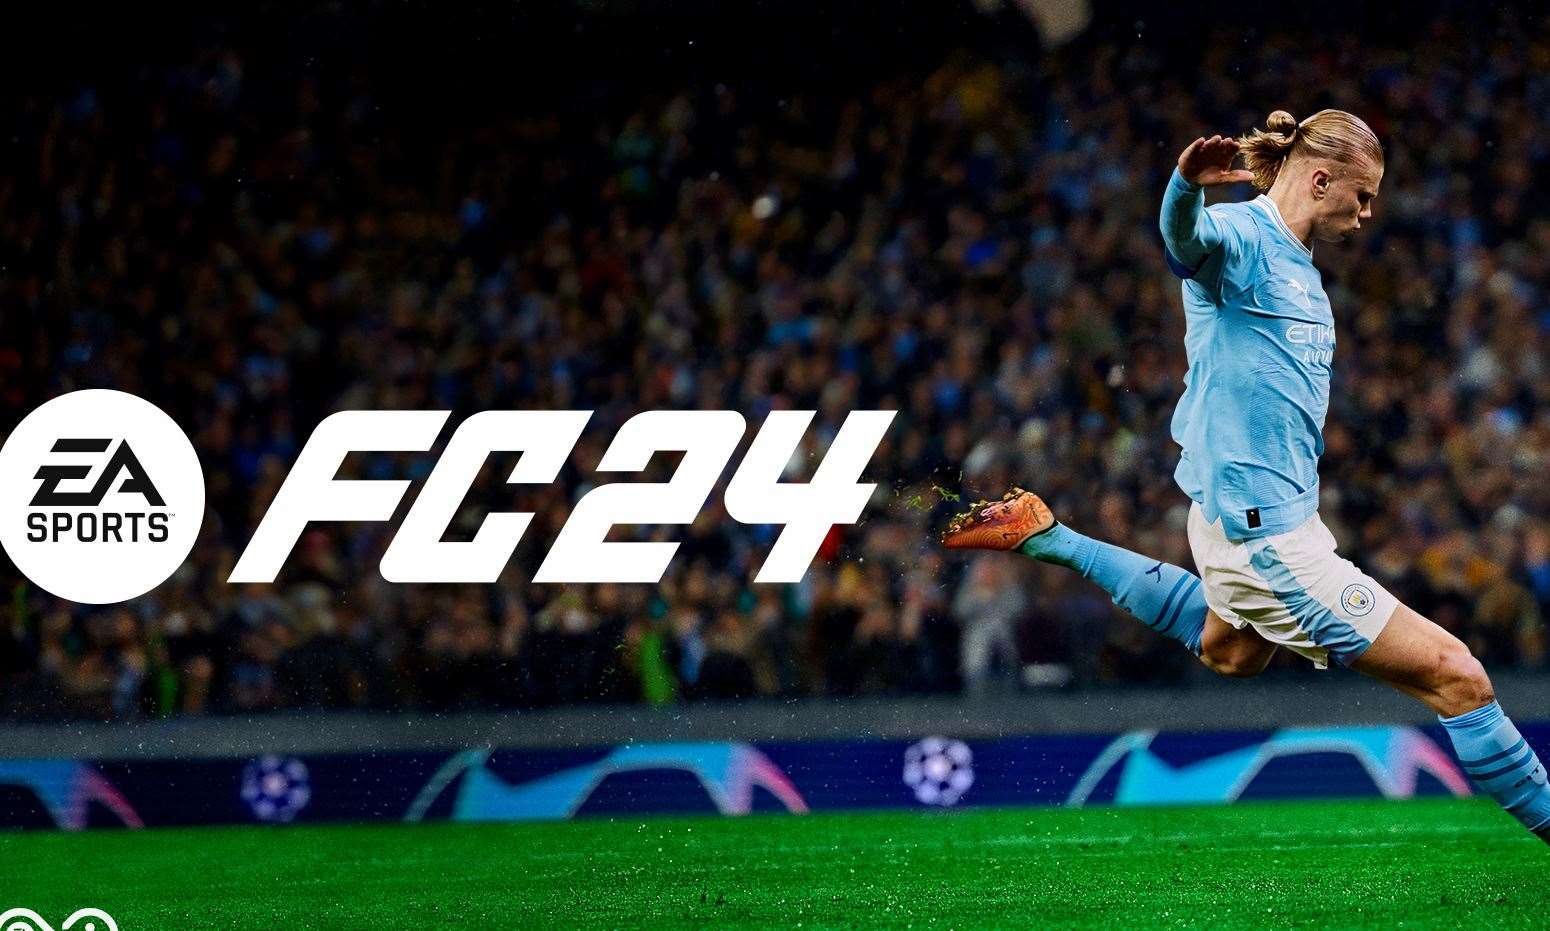 FIFA, sorry, FC24, is a polished new game which was released this week